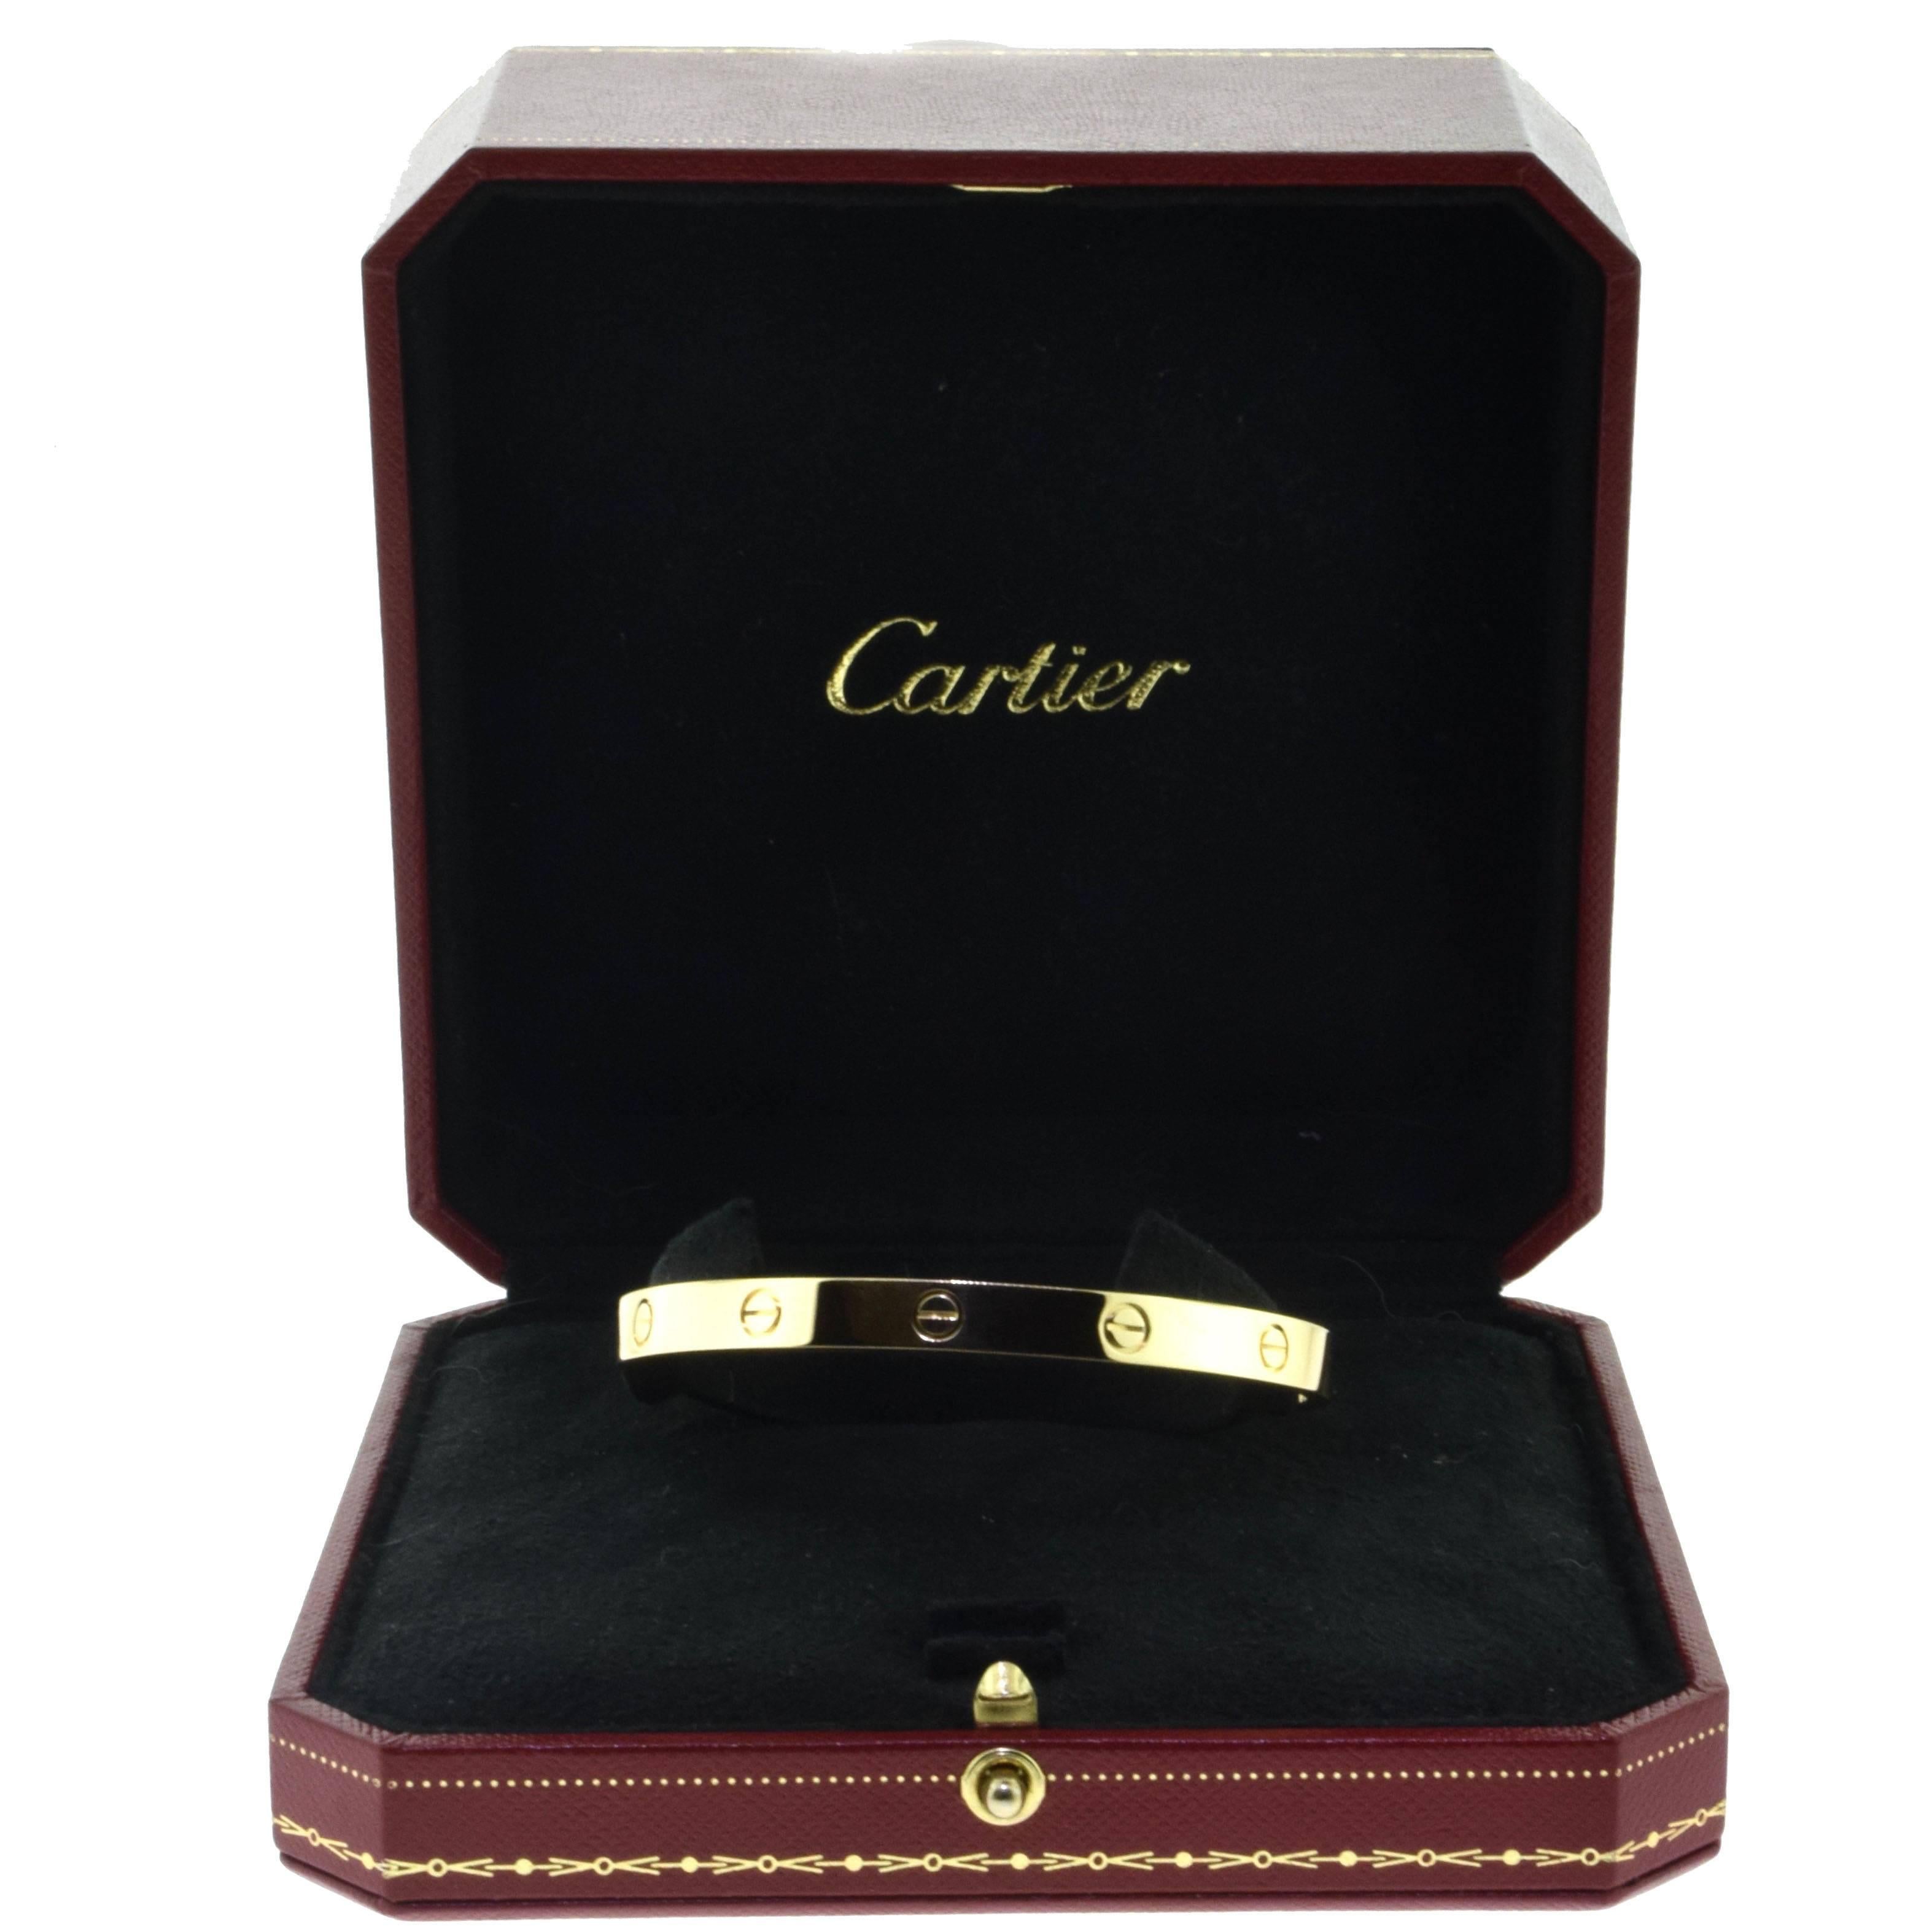 Designer: Cartier
Collection: LOVE
Type: Cuff
Bracelet Size: 20 = 20 cm
Metal: Yellow Gold
Metal Purity: 18k 
Total Item Weight (g): 29.3
Hallmark: 20 Cartier 750 Serial No.
Collateral: Box